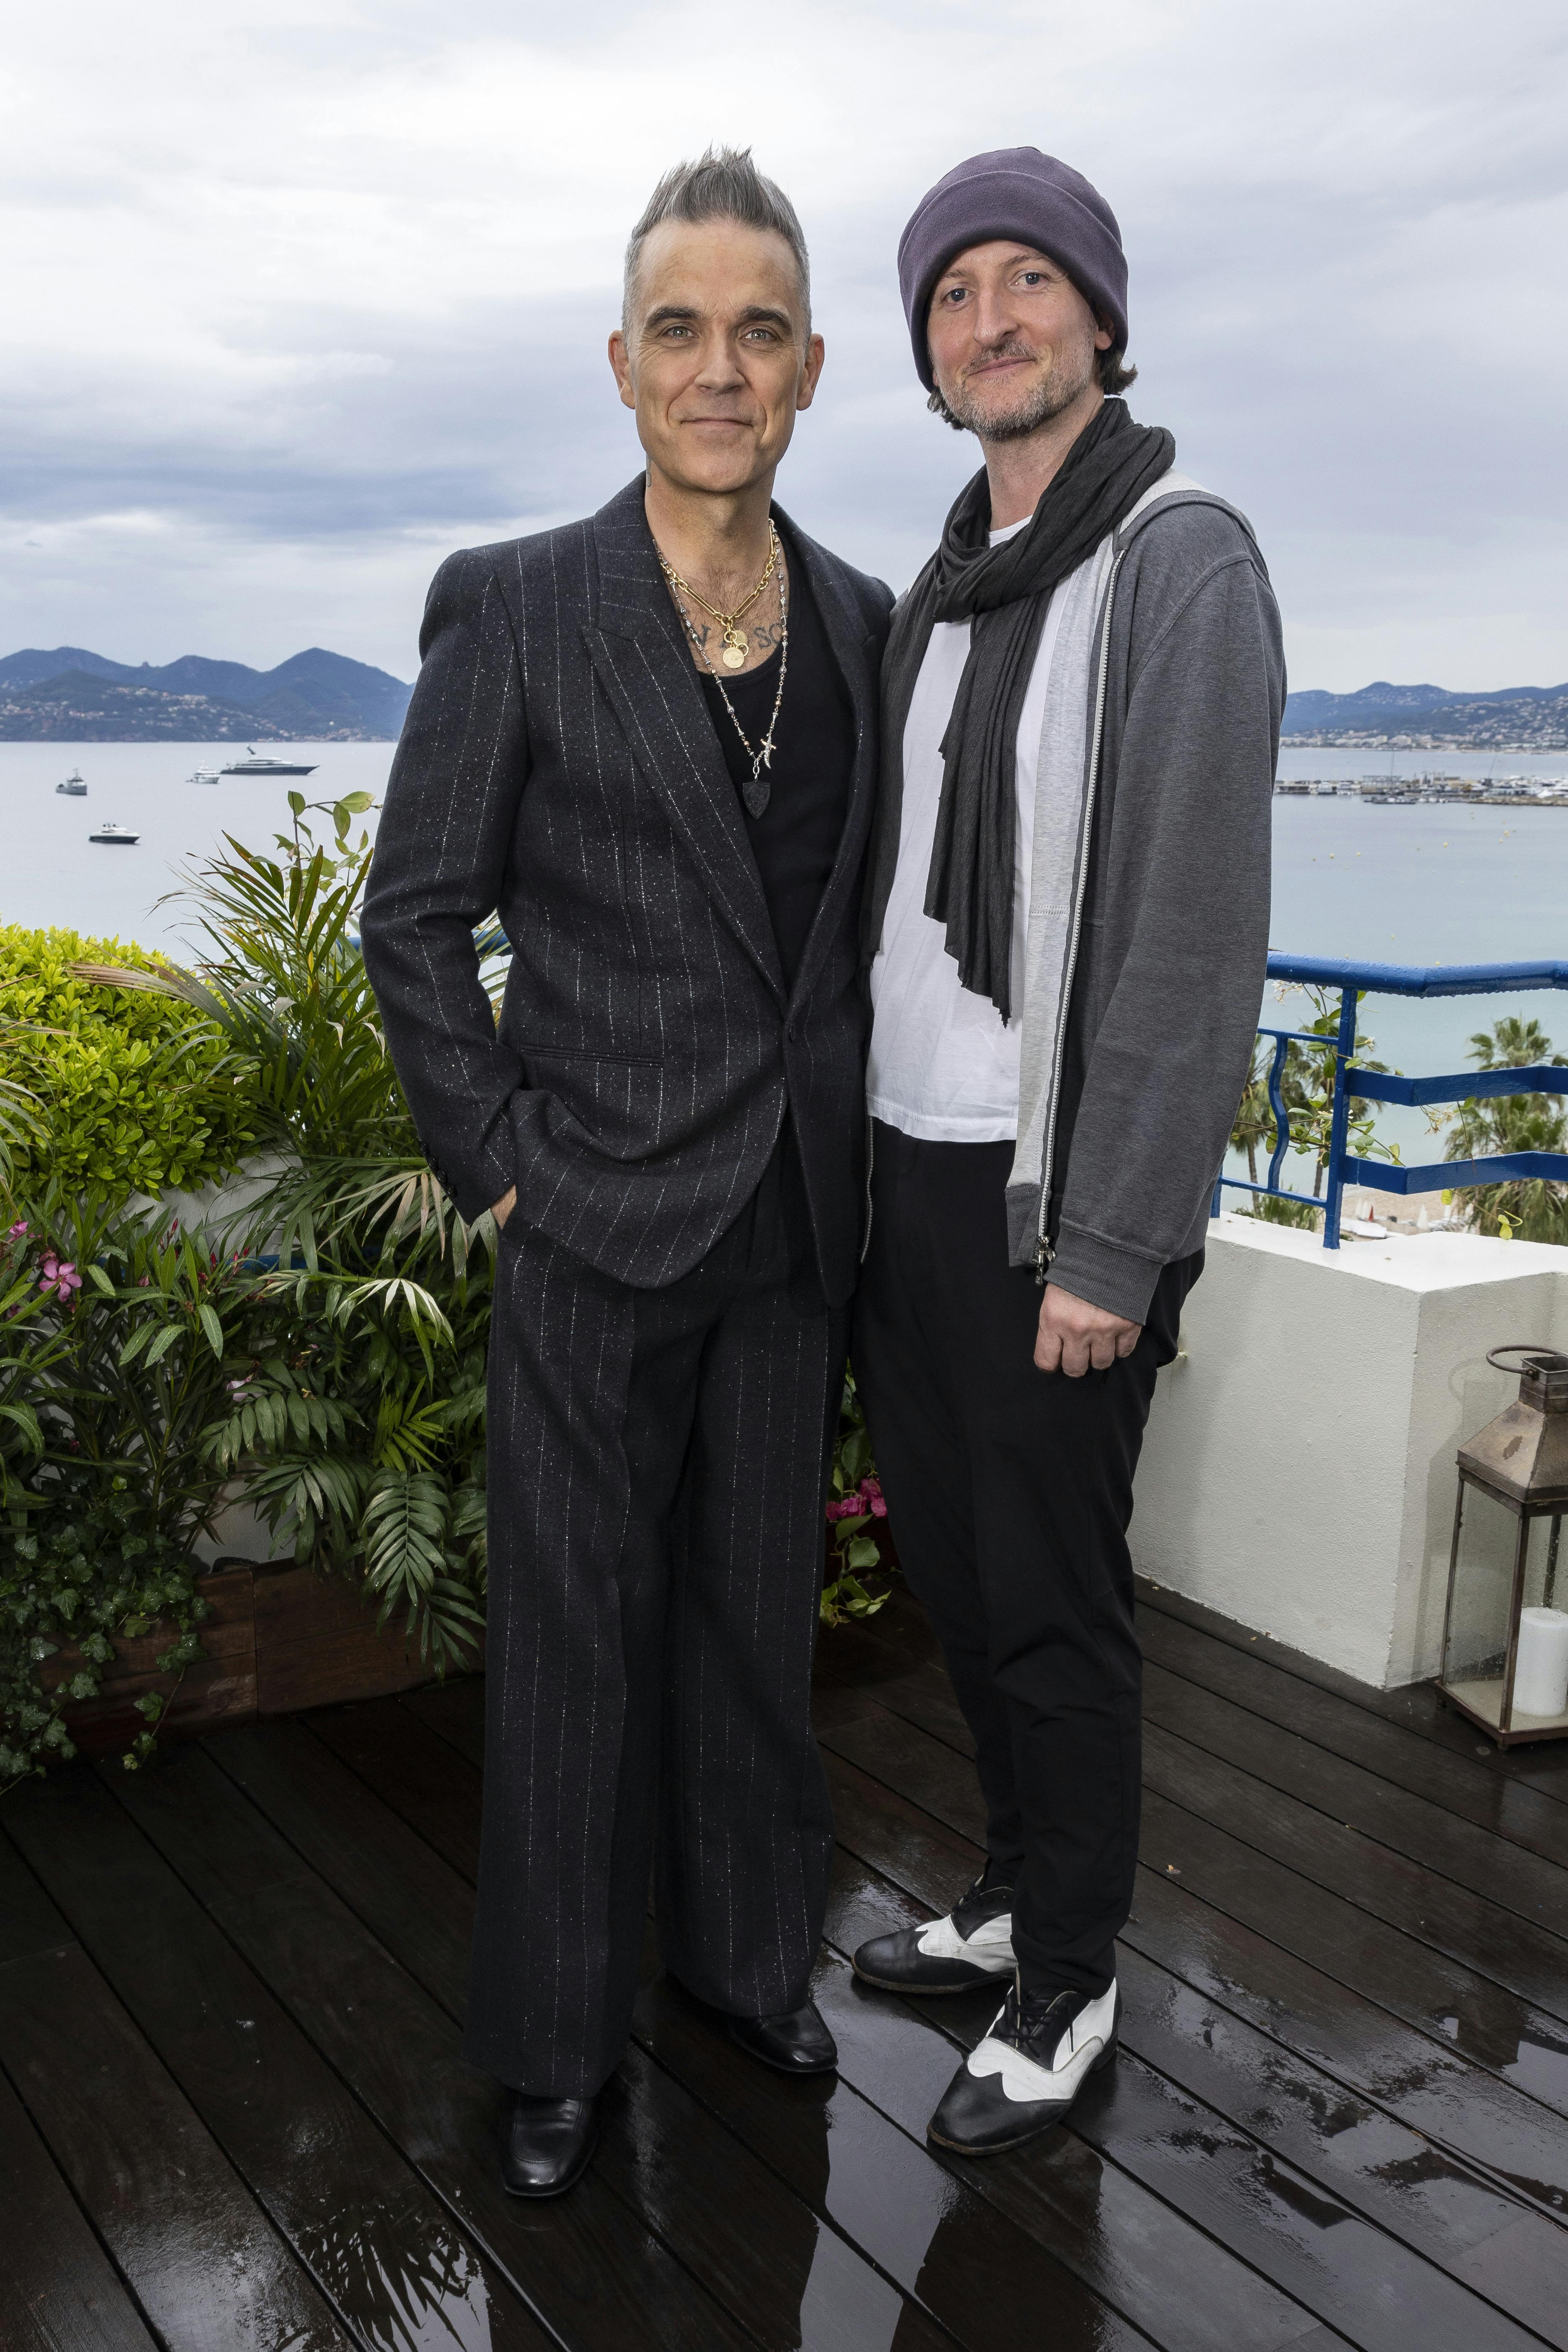 Robbie Williams, left, and director Michael Gracey pose for portrait photographs for the film 'Better Man', at the 76th international film festival, Cannes, southern France, Saturday, May 20, 2023. (Photo by Joel C Ryan/Invision/AP)